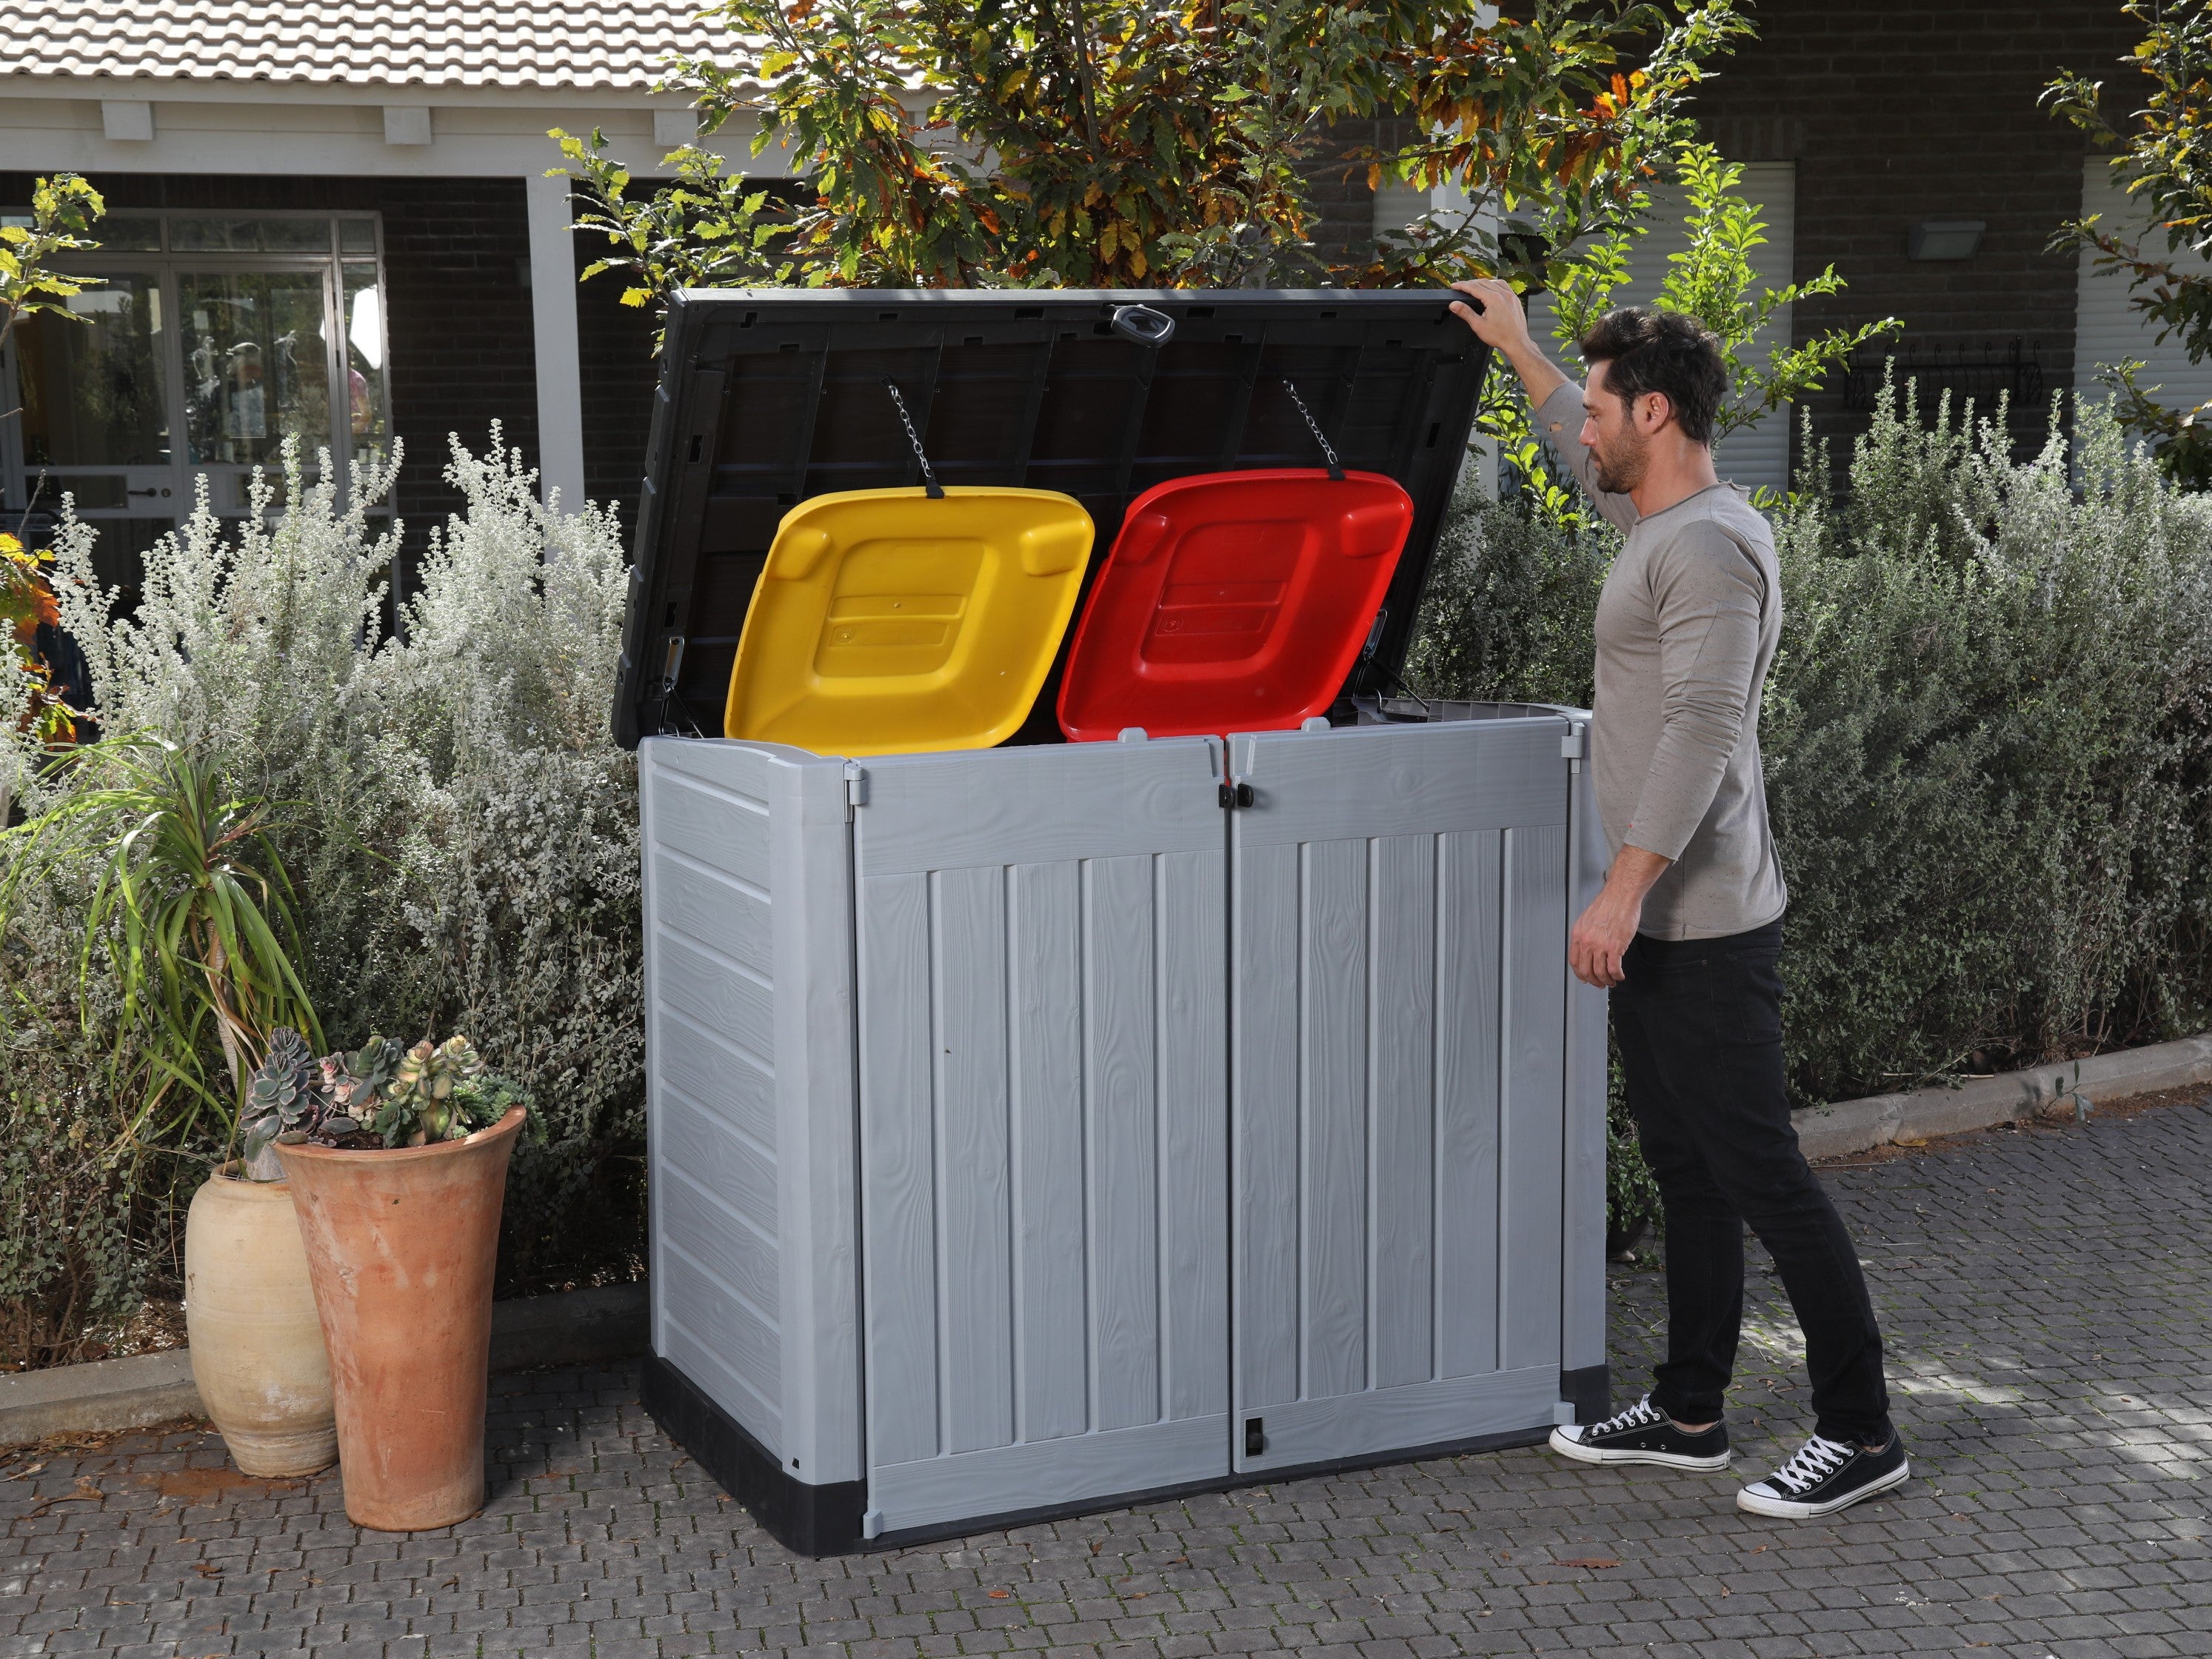 Keter Store it Out Ace with auto bin opening kit